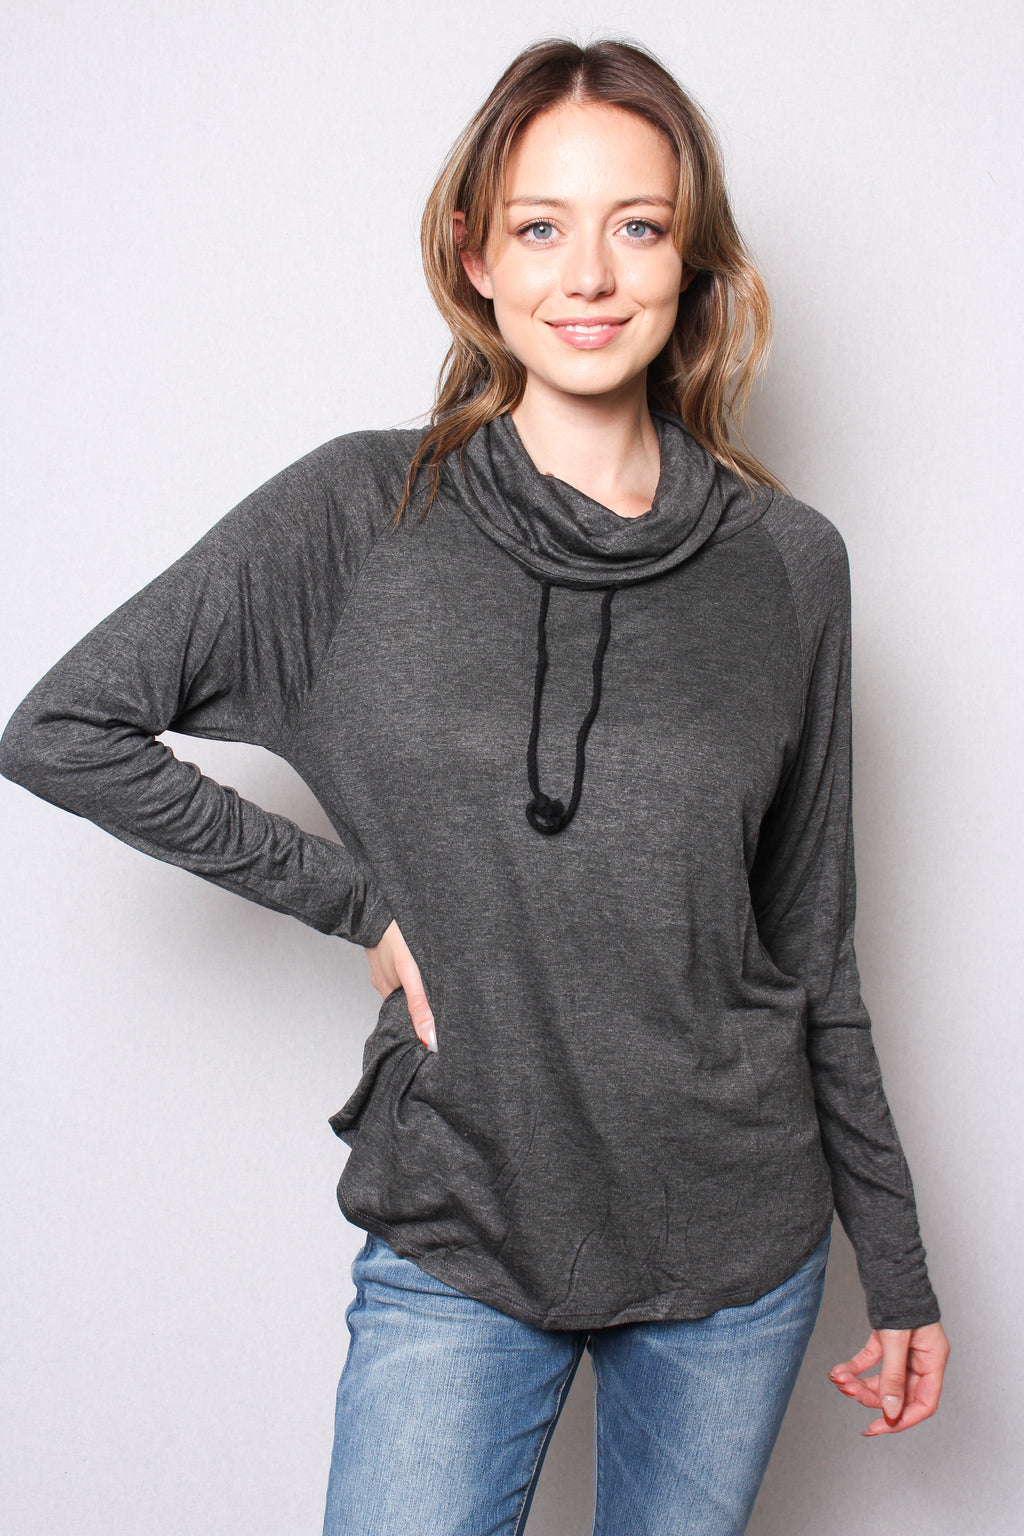 Women's Loose Fit Athleisure Cowl Neck Long Sleeves Top